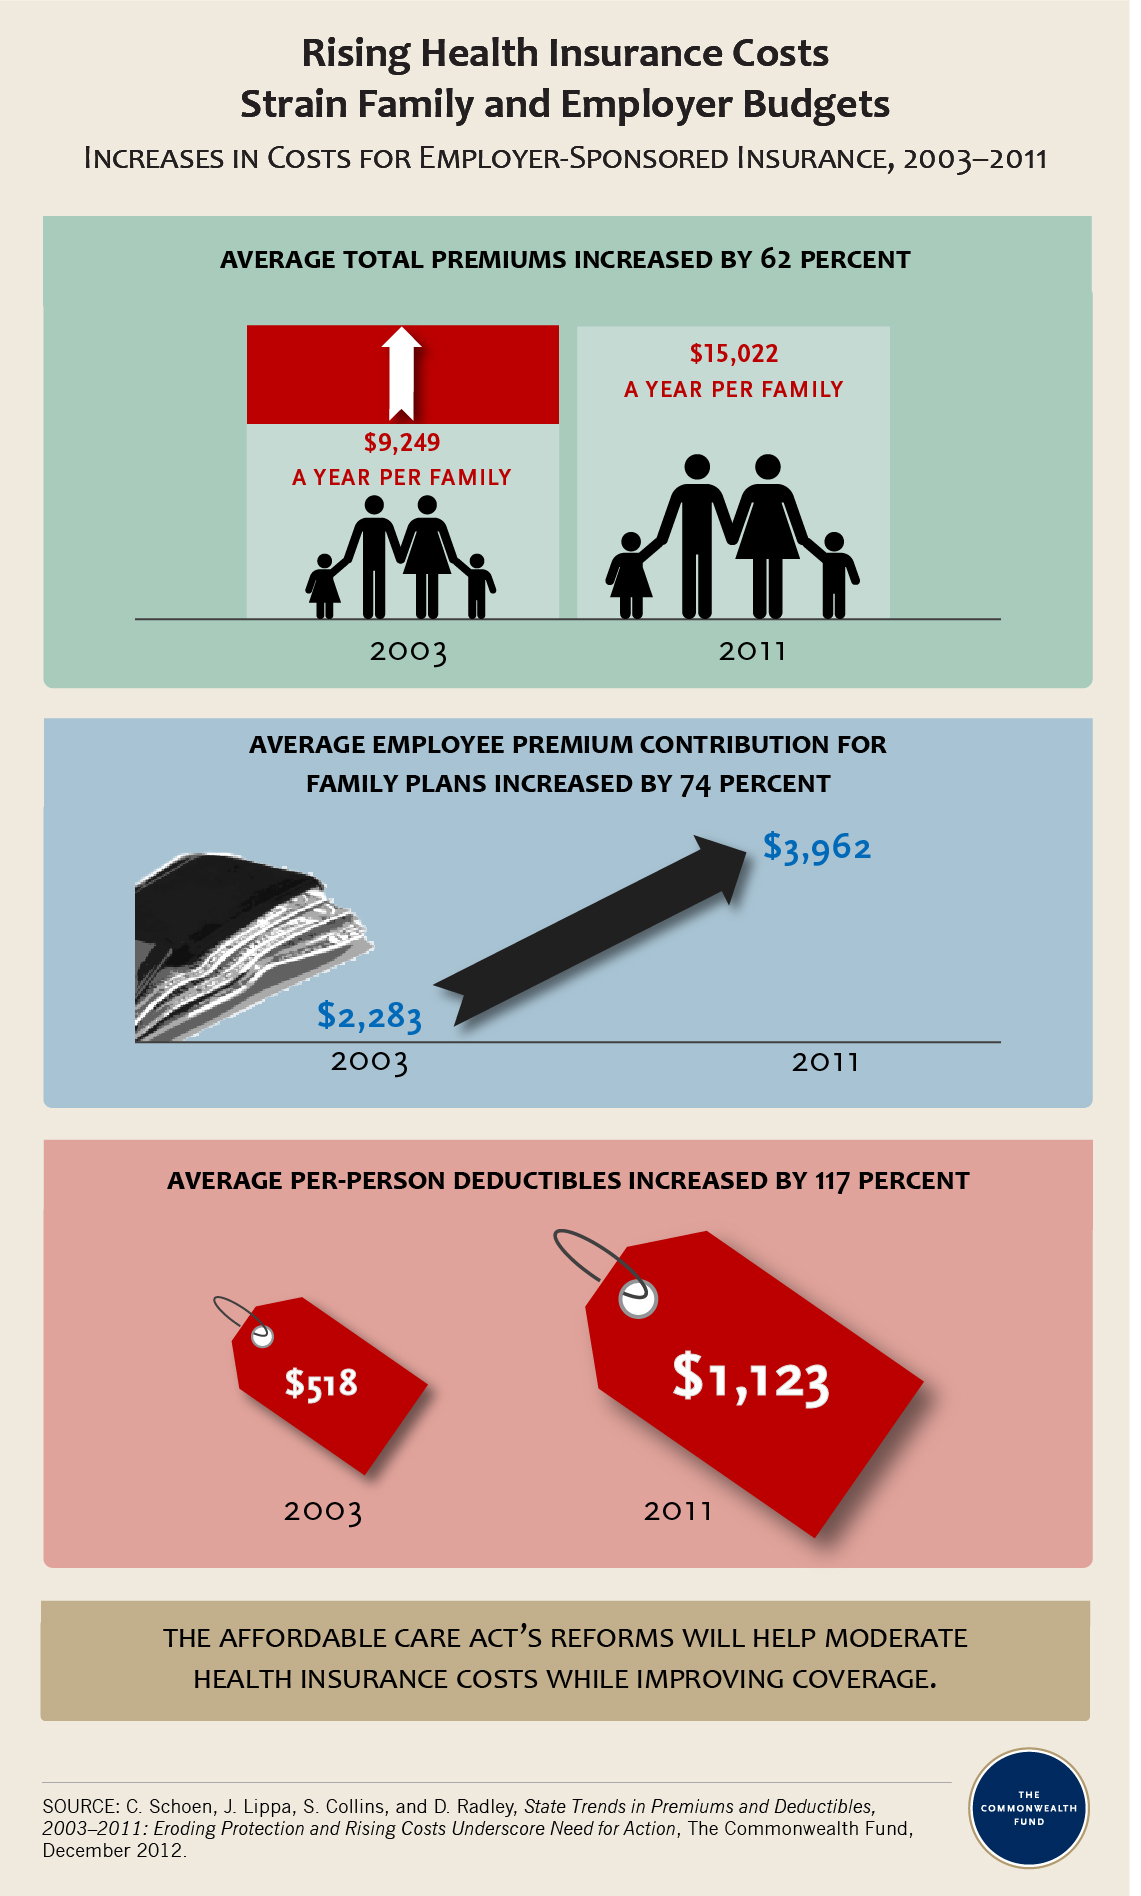 IMPORTED: www_commonwealthfund_org____media_images_infographics_2012_state_premiums_2012_infographic_v3.jpg